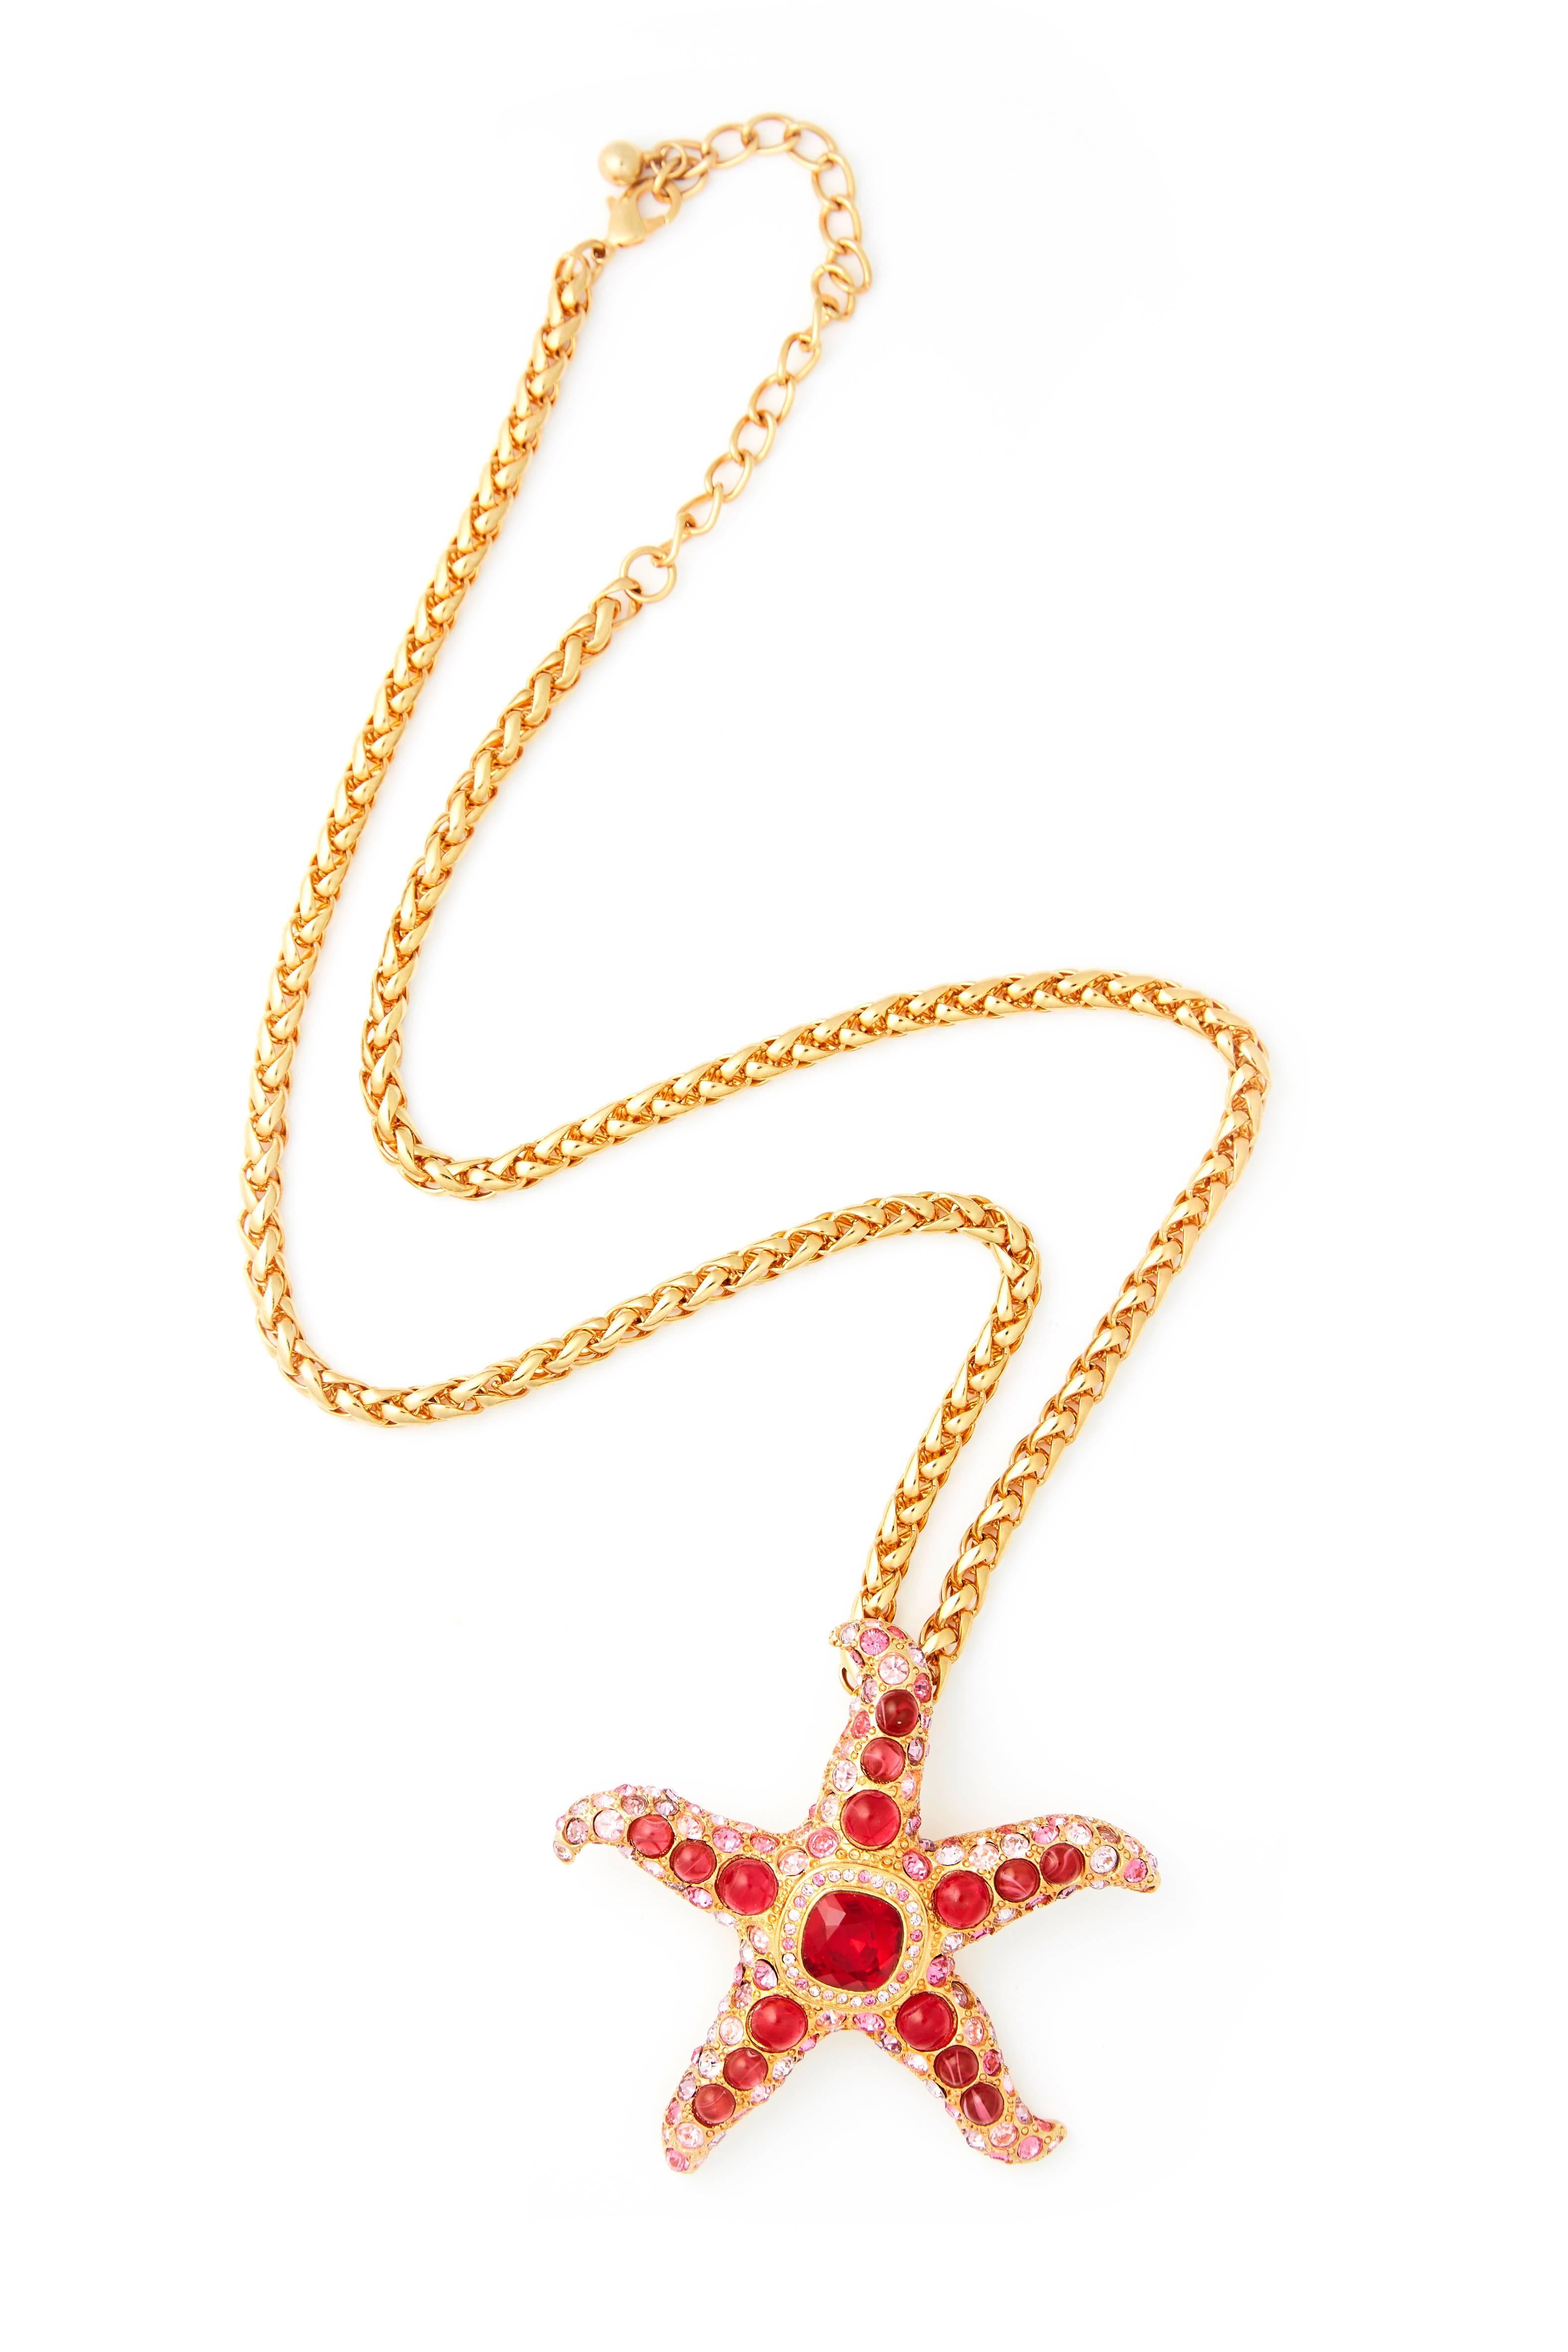 Starfish pendant with Red and Pink crystals on a 33 cm gold plated chain> Finished with a 10 cm extender for the perfect fit. 